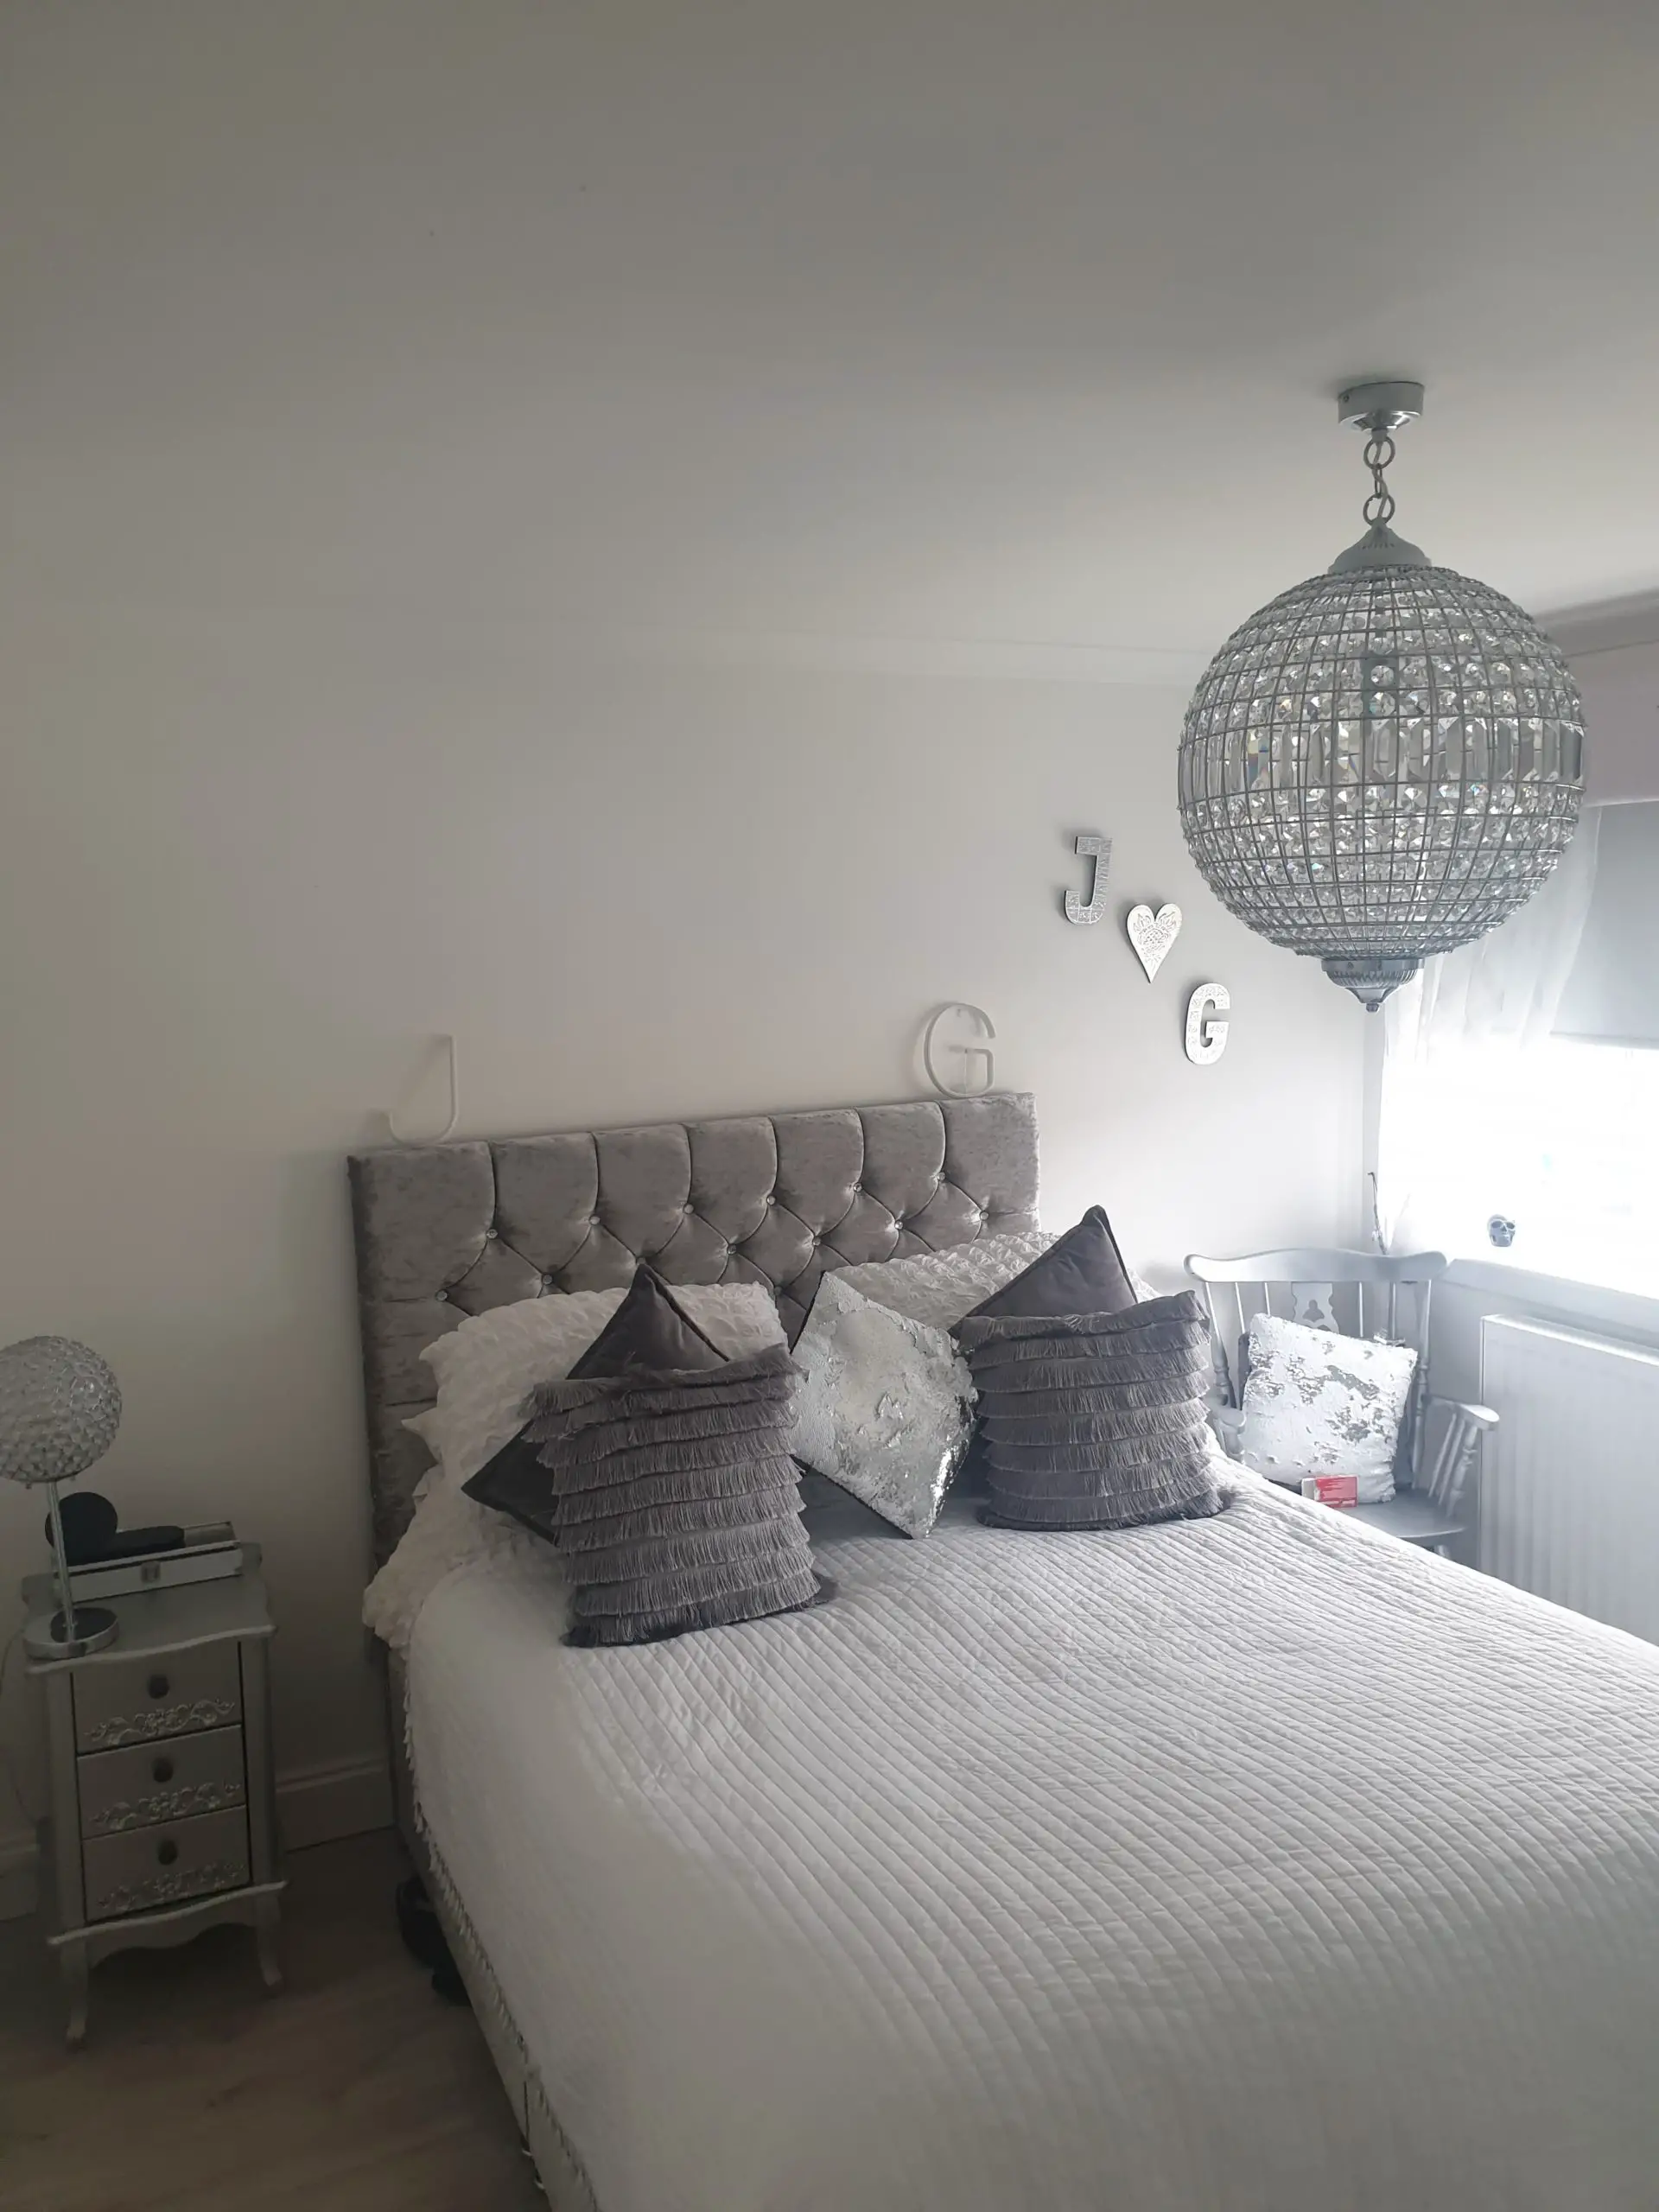 Bright Natural Light in Gray and White Bedroom